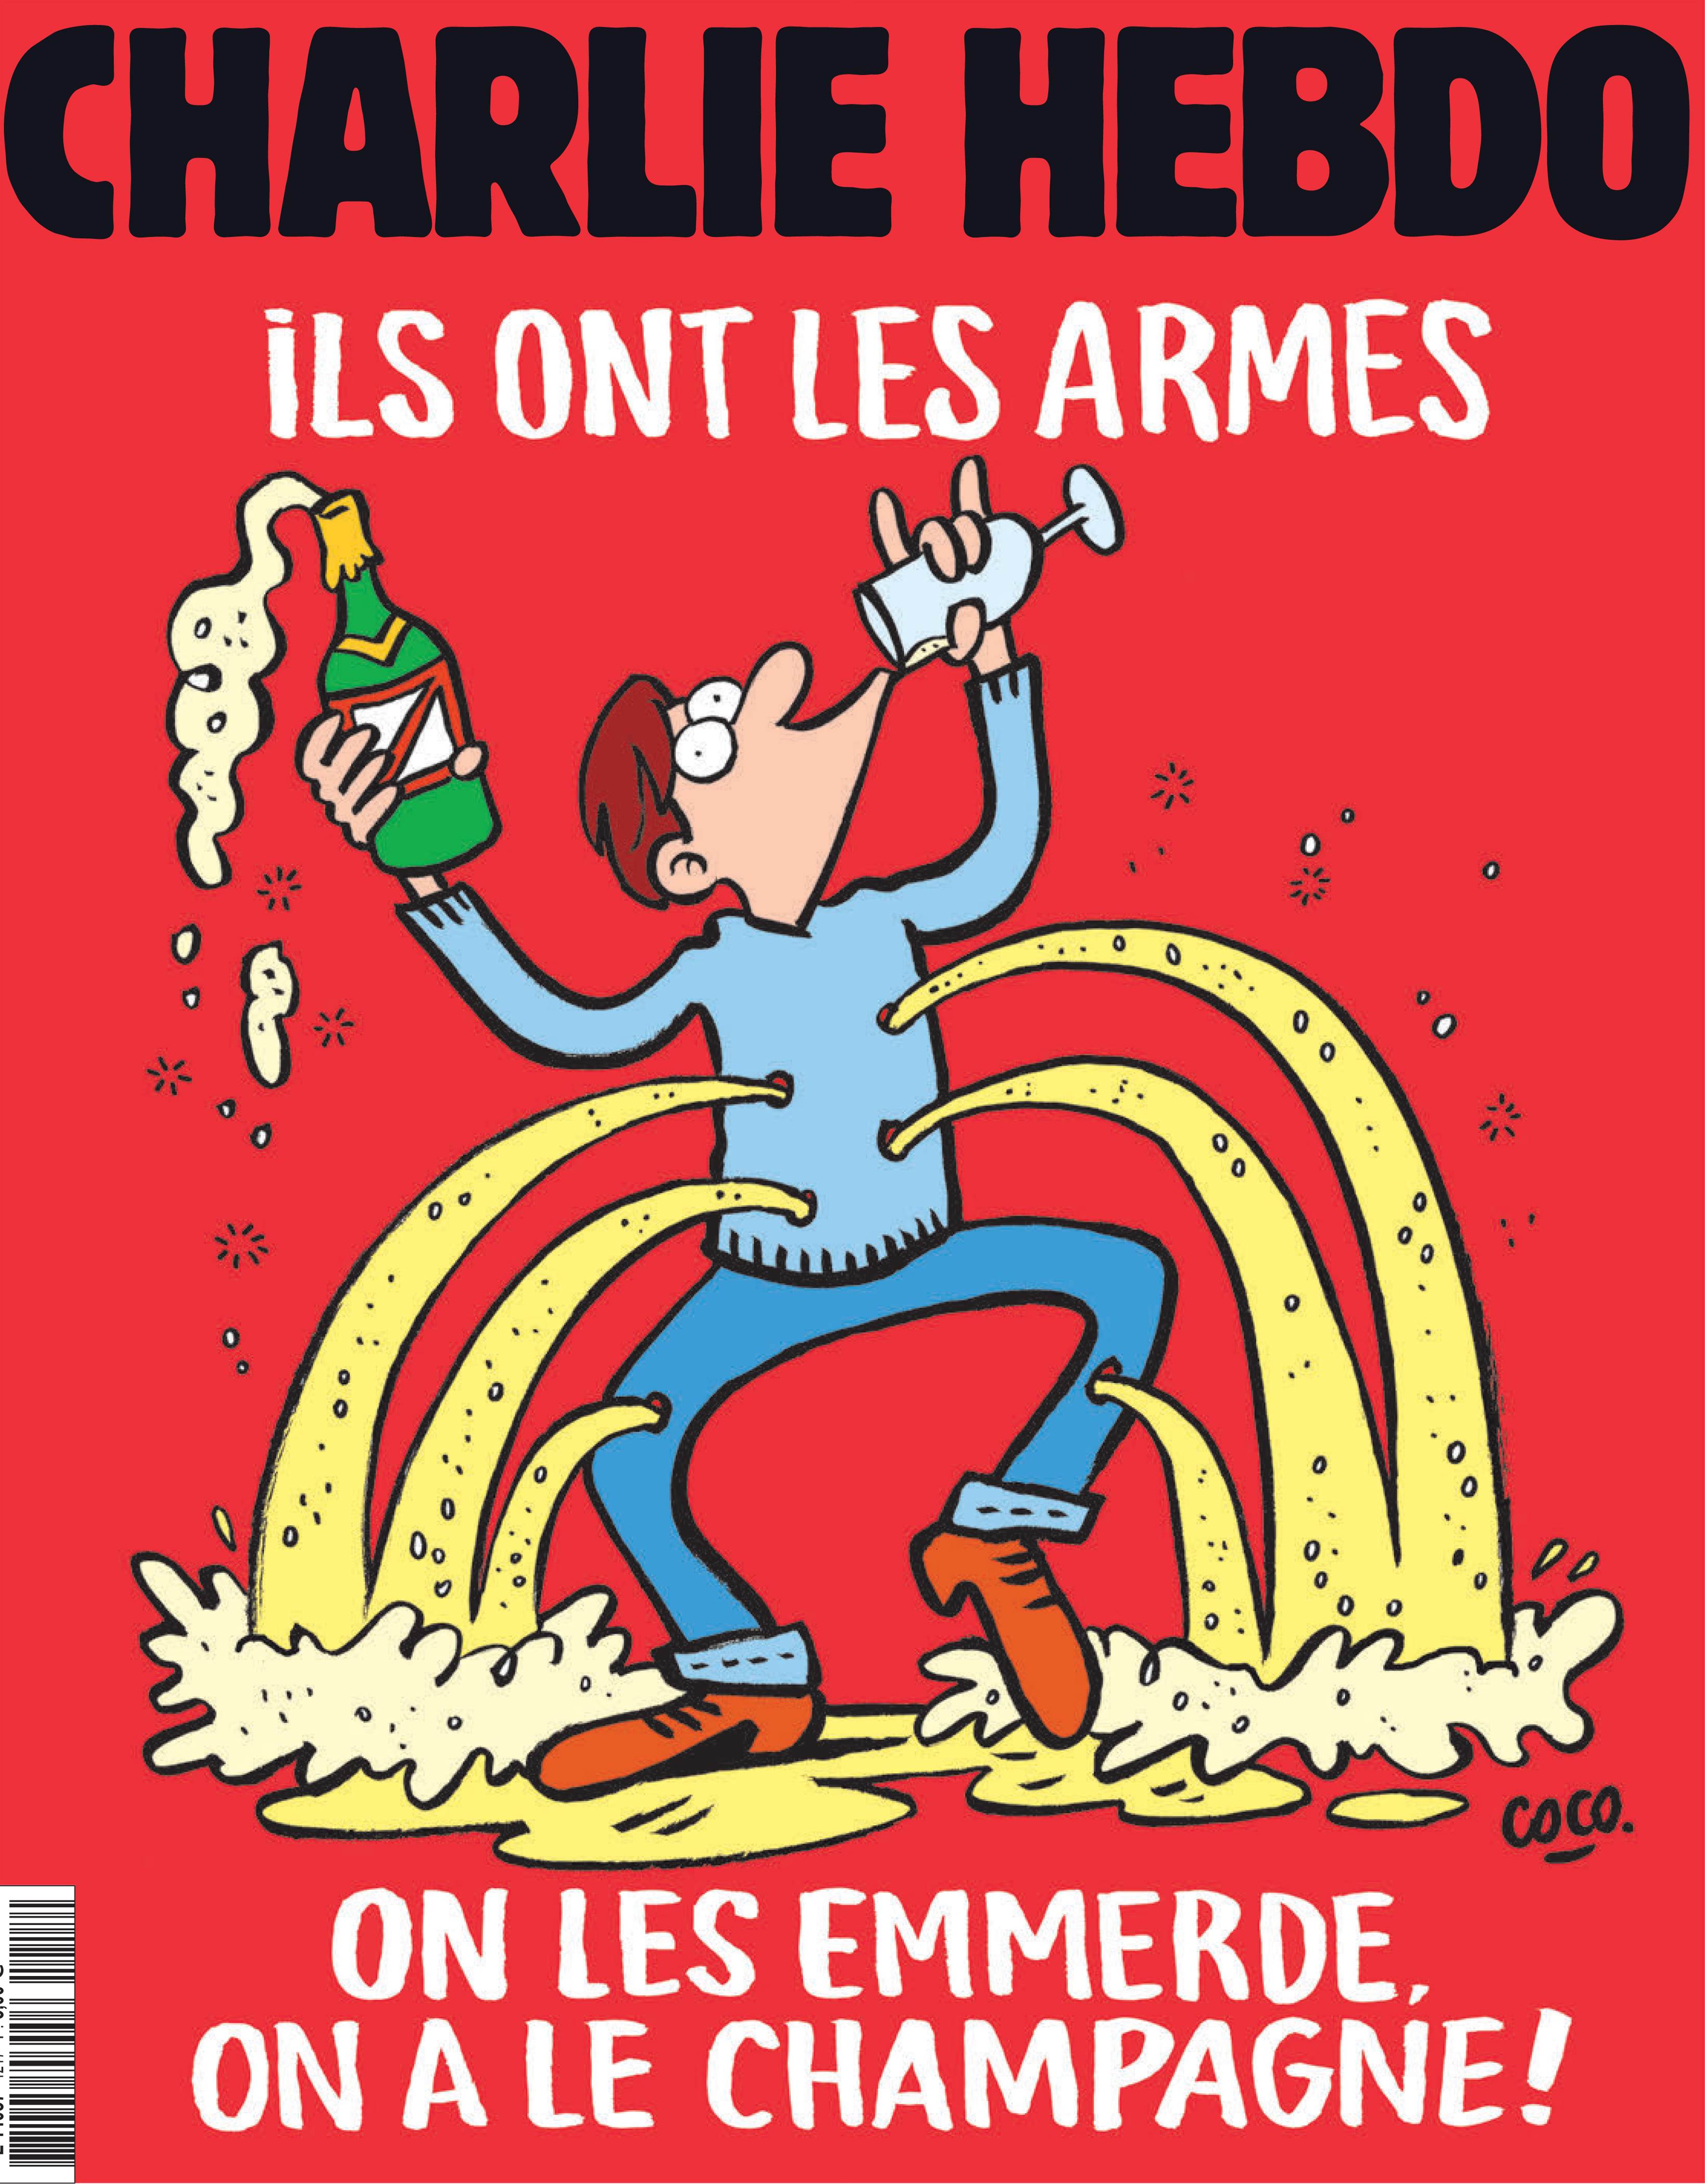 The cover of the Charlie Hebdo magazine after the terror attack in Paris on November 13, reads  "They have weapons, Screw them, We have Champagne". Photo: AFP